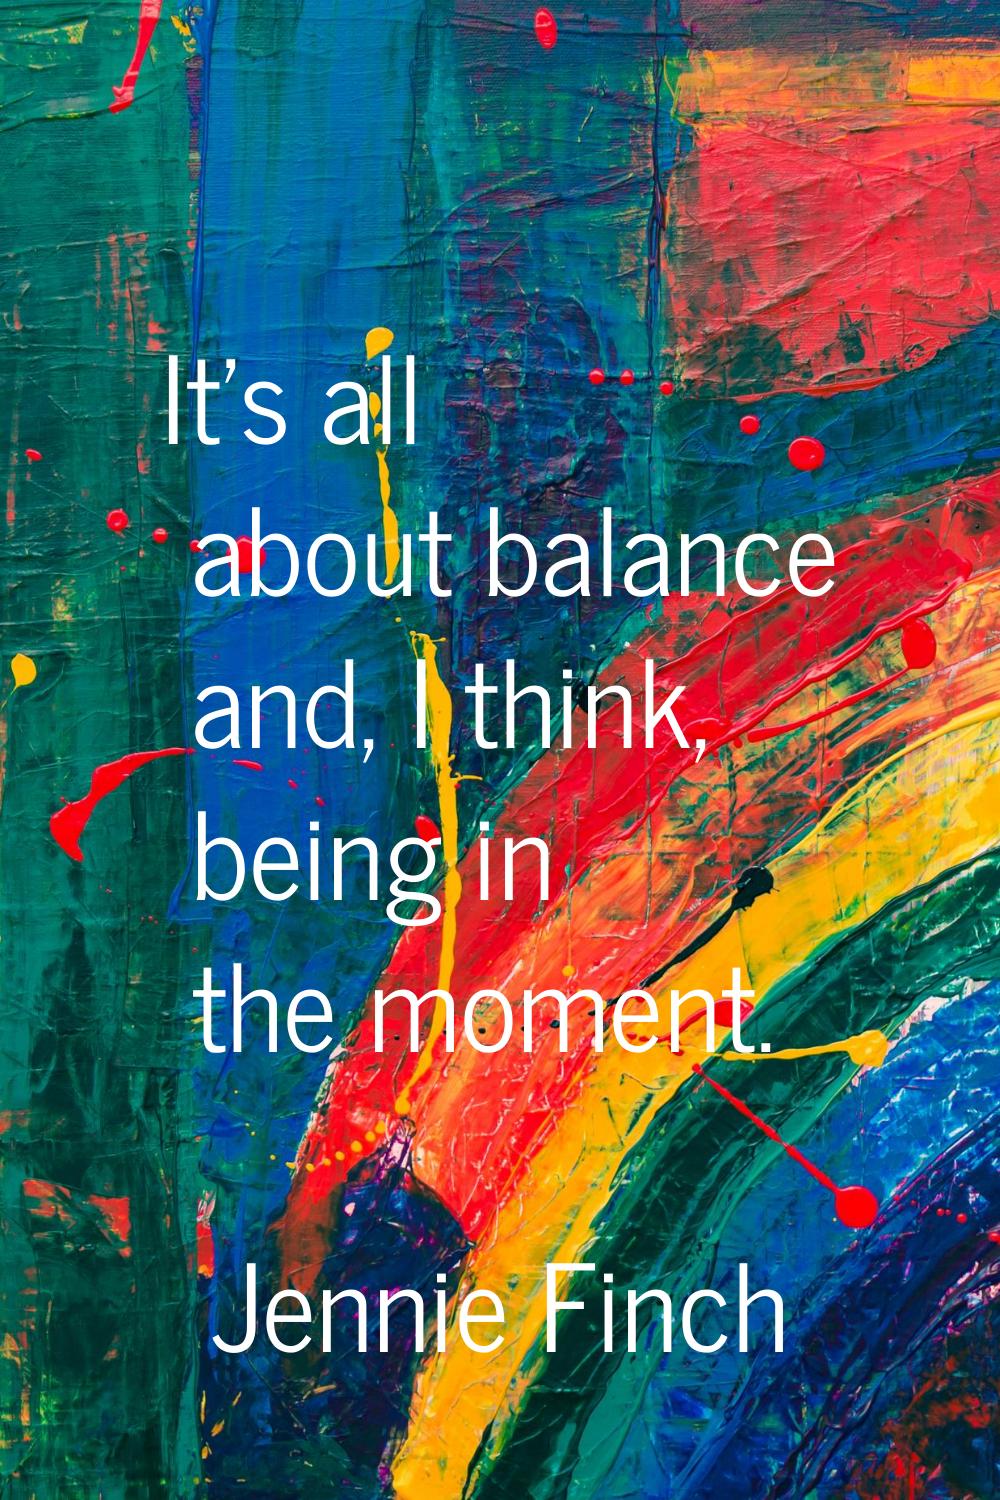 It's all about balance and, I think, being in the moment.